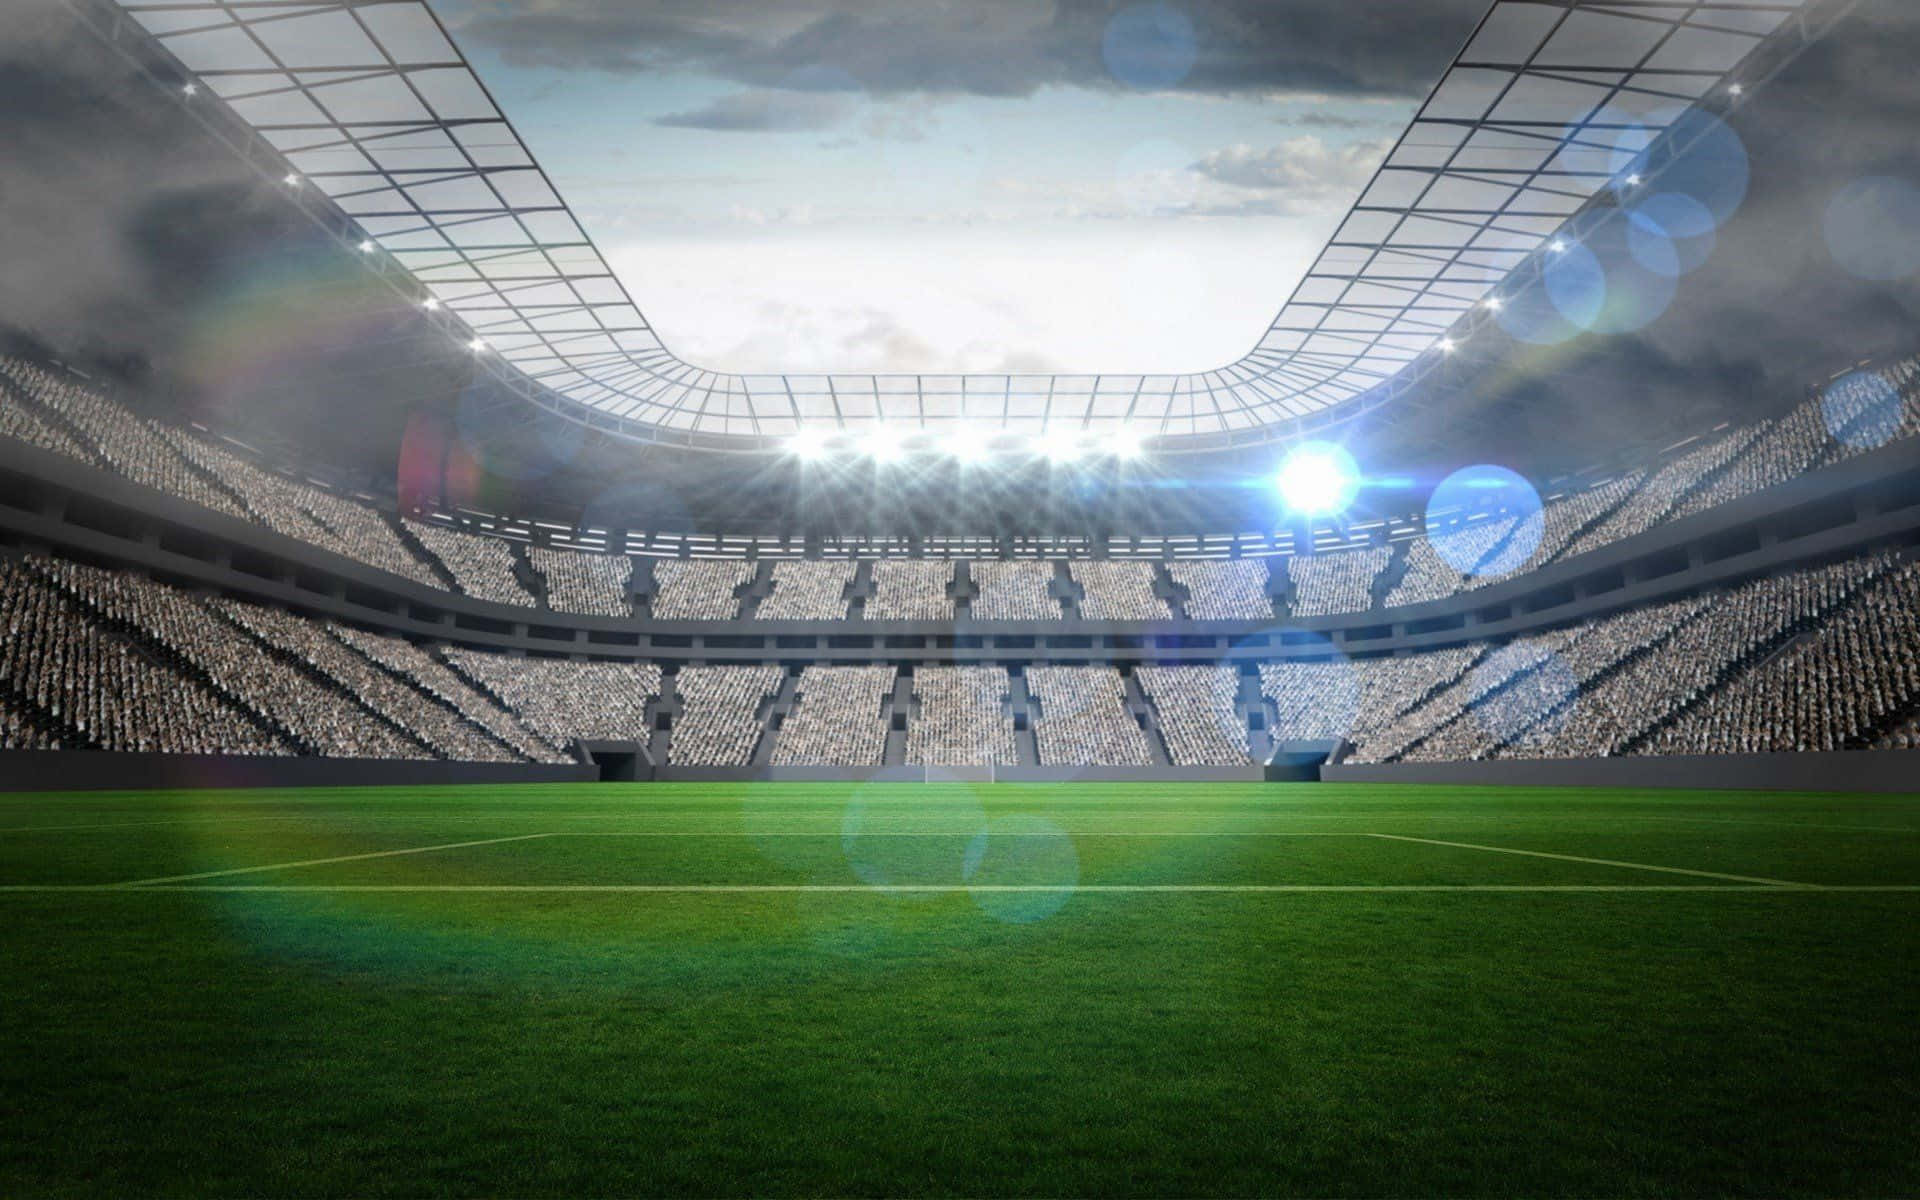 The Spectacular View of a Soccer Stadium Wallpaper